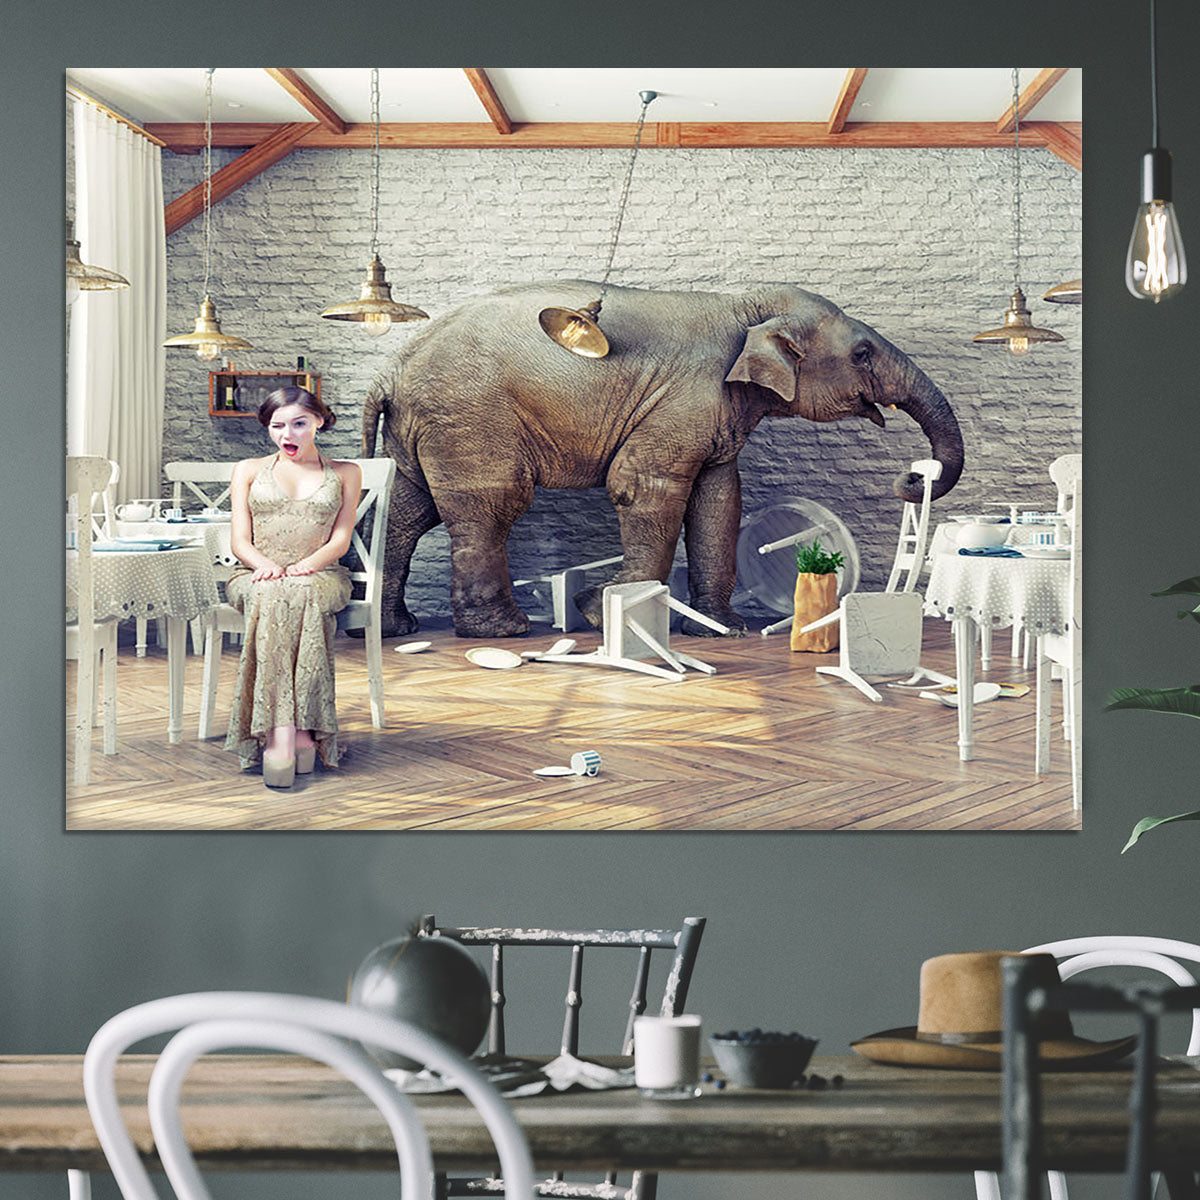 The elephant calm in a restaurant interior. photo combination concept Canvas Print or Poster - Canvas Art Rocks - 3